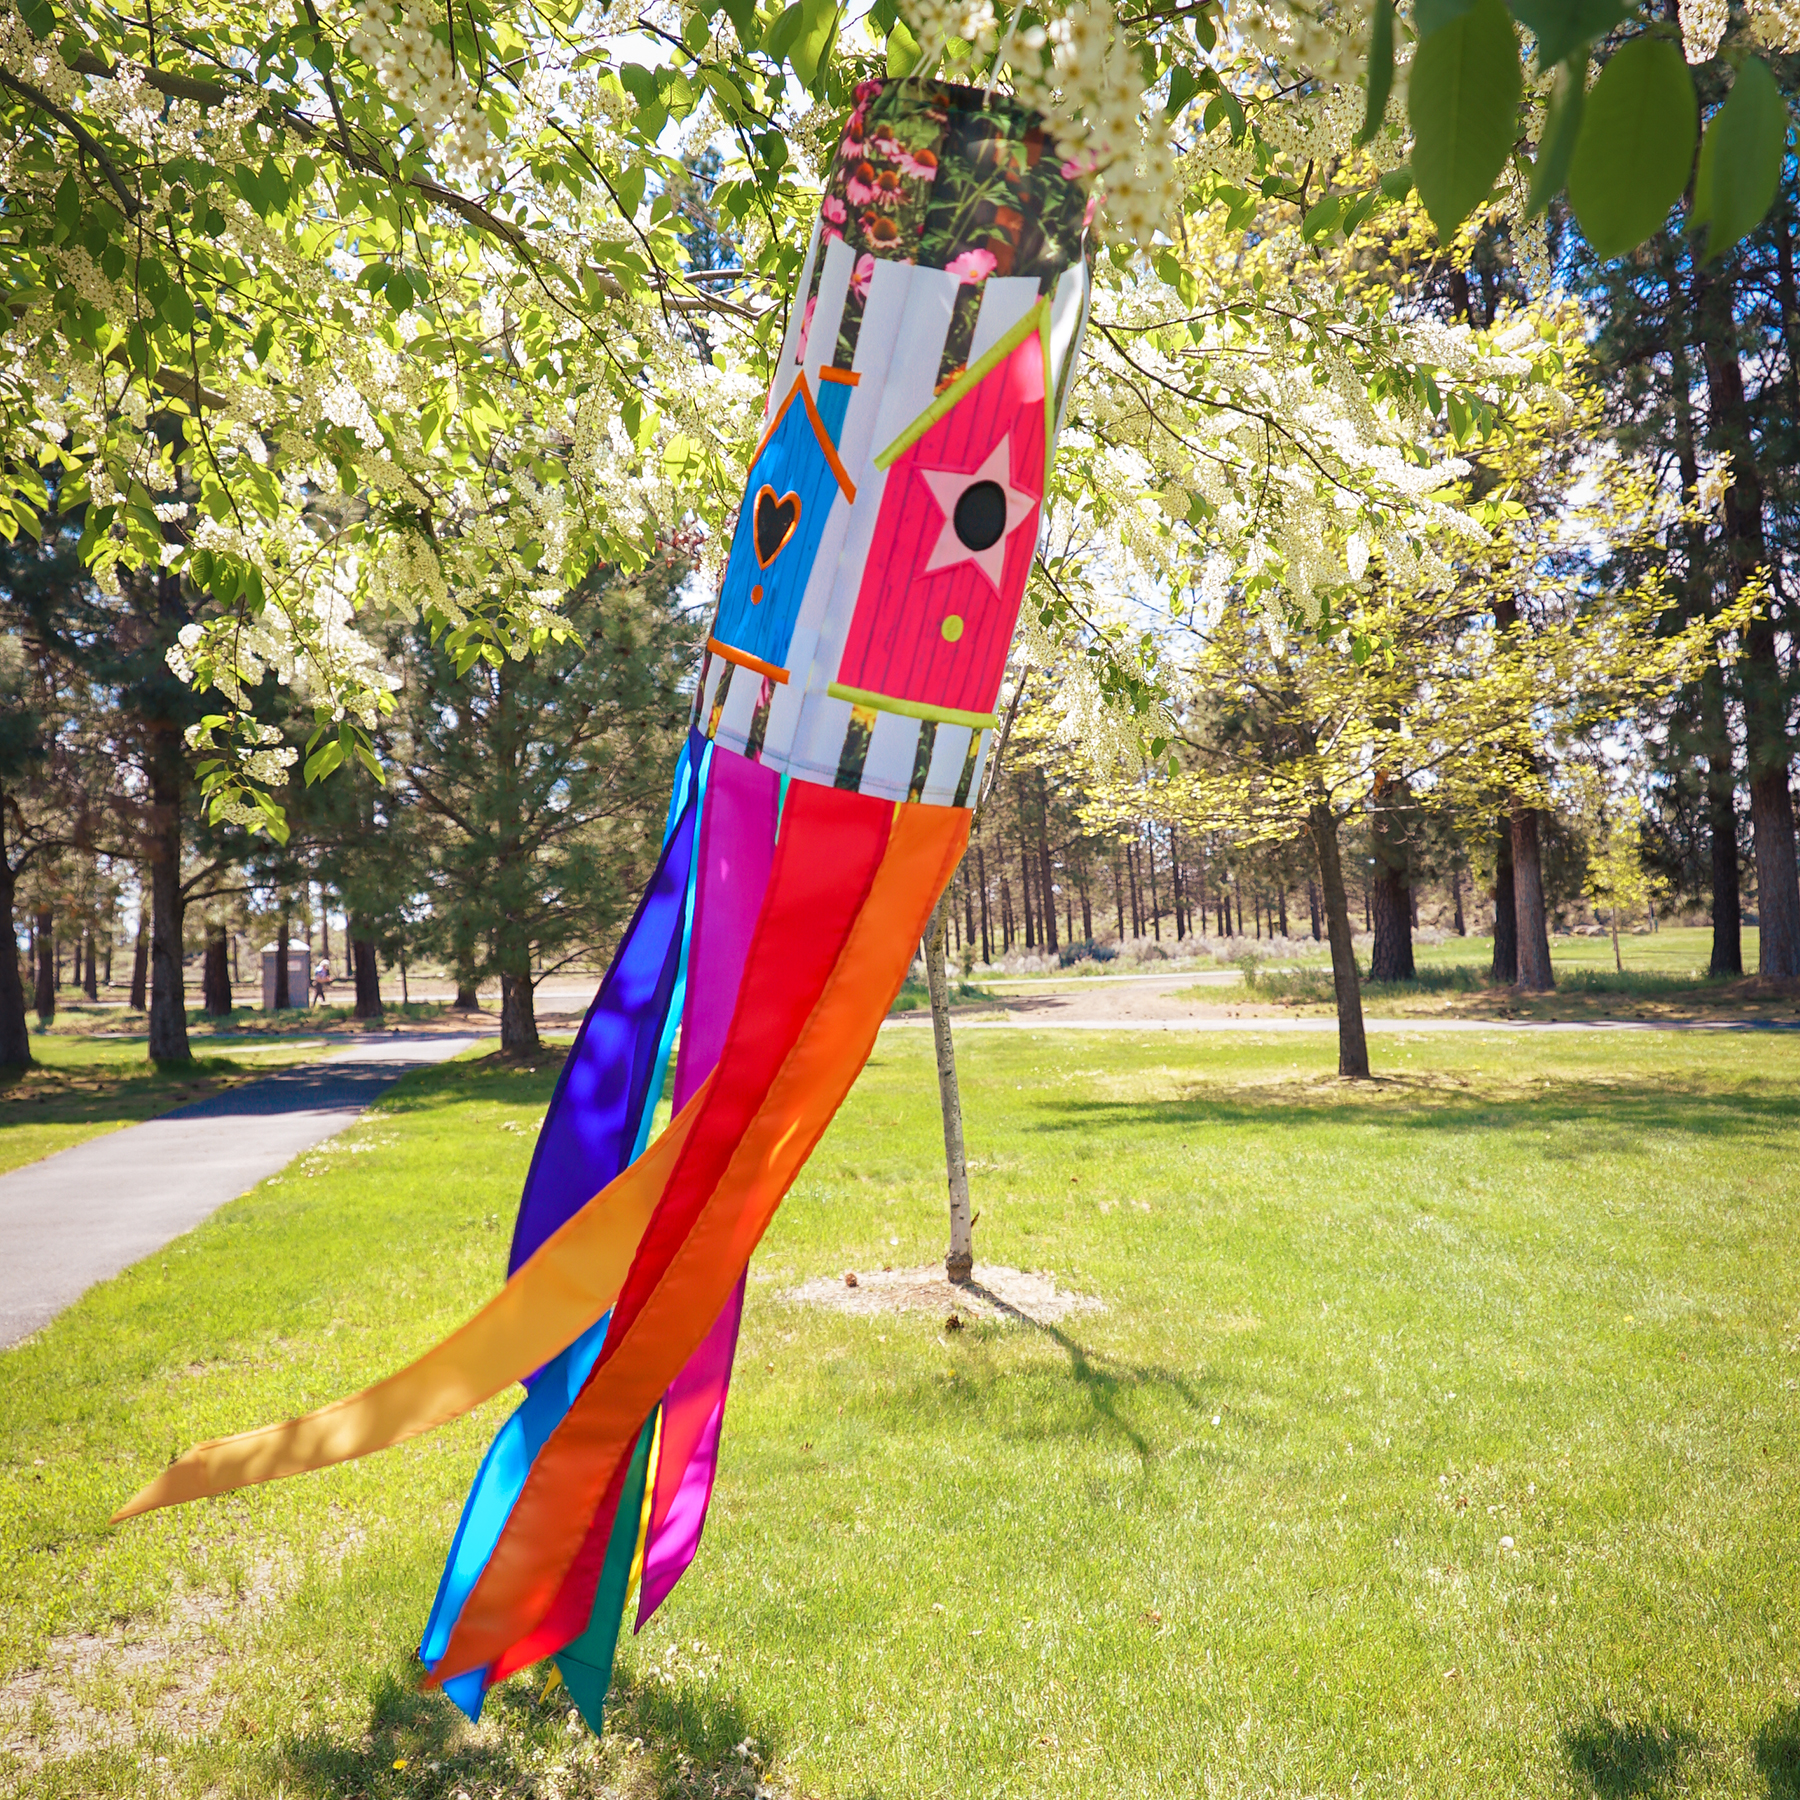 In The Breeze 5072 — Birdhouse Garden 40" Windsock, Colorful Outdoor and Garden Decoration - image 2 of 7